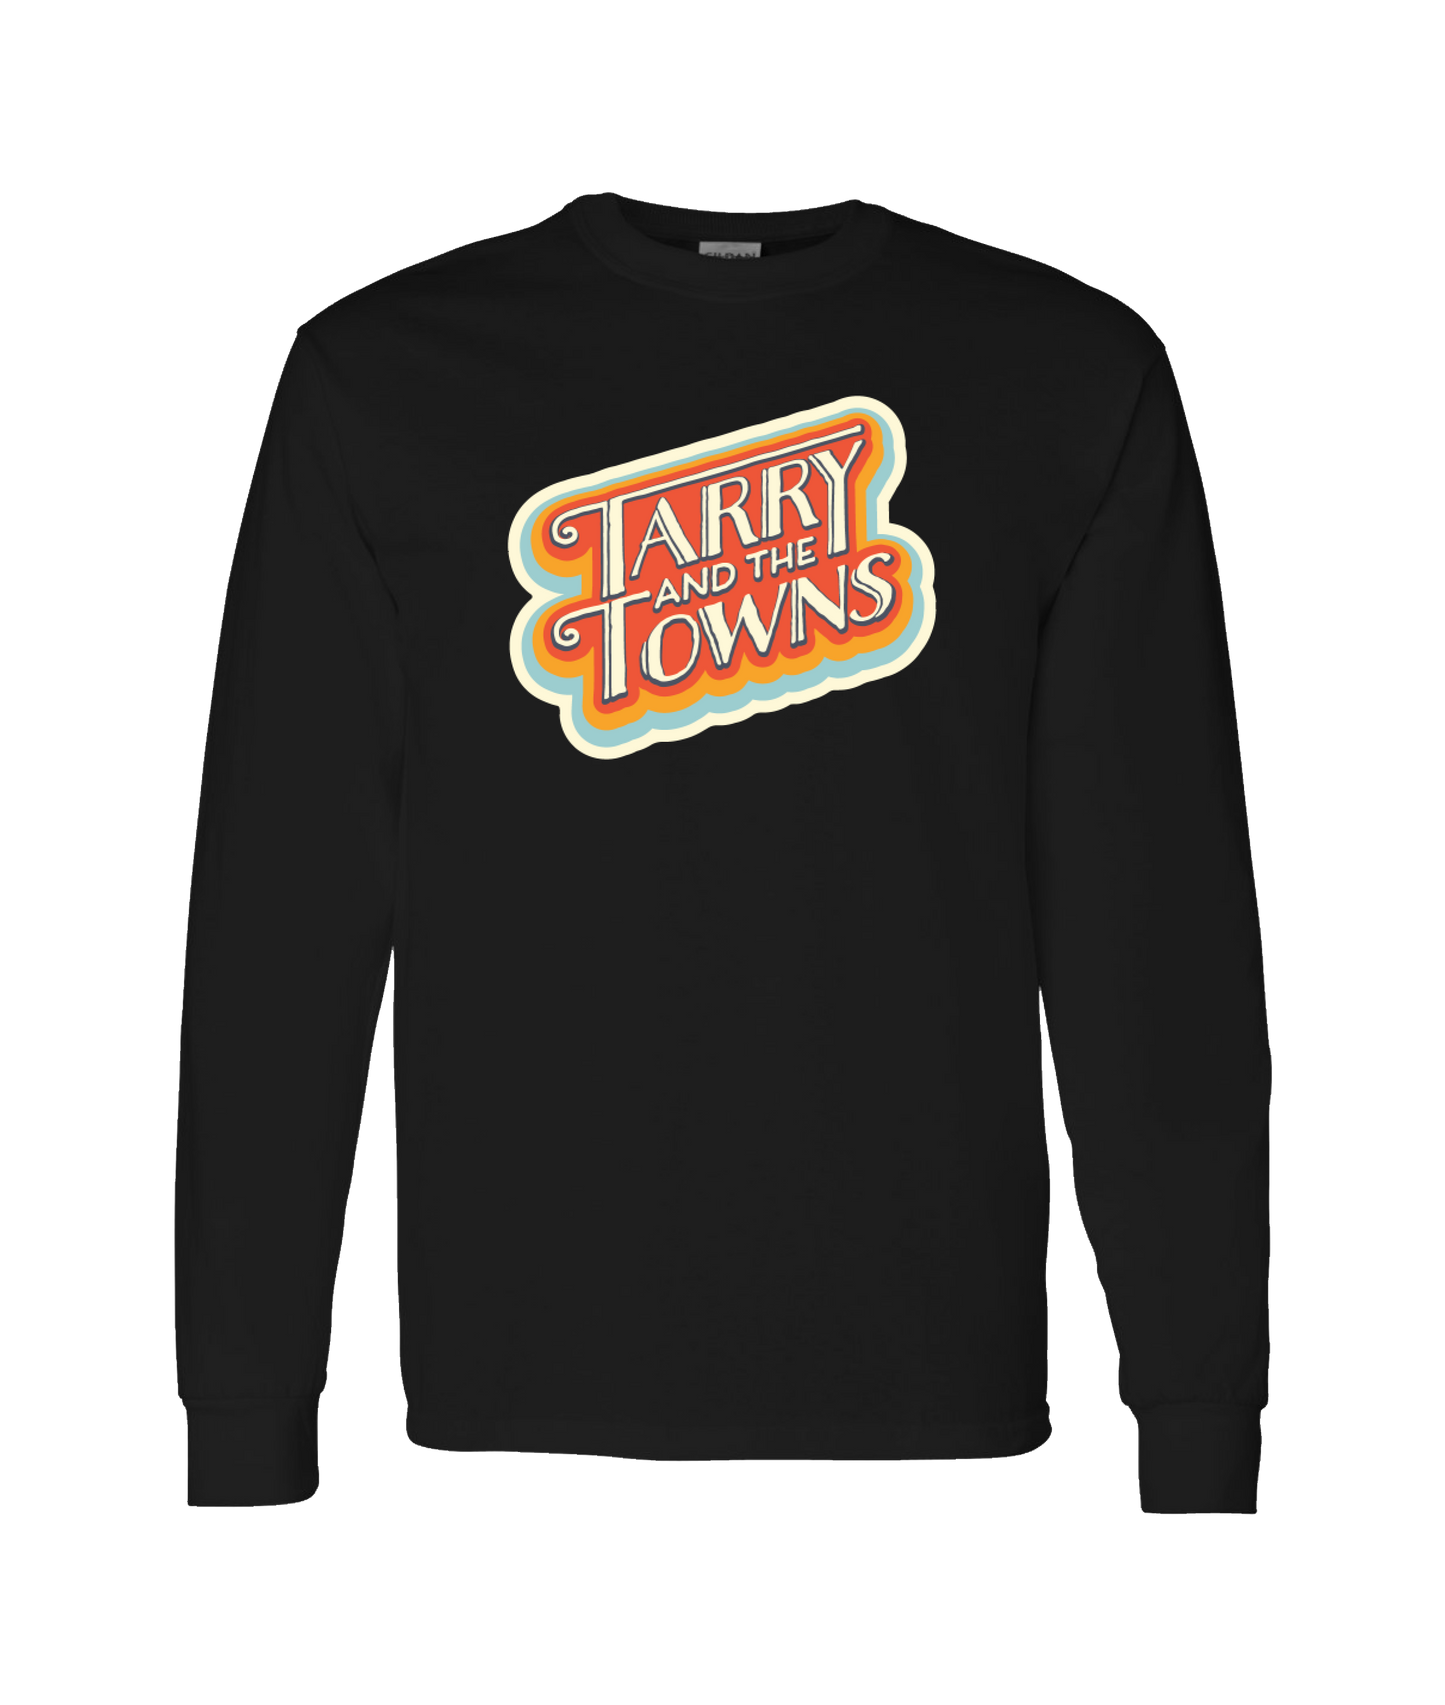 Tarry and the Towns - Vintage - Black Long Sleeve T